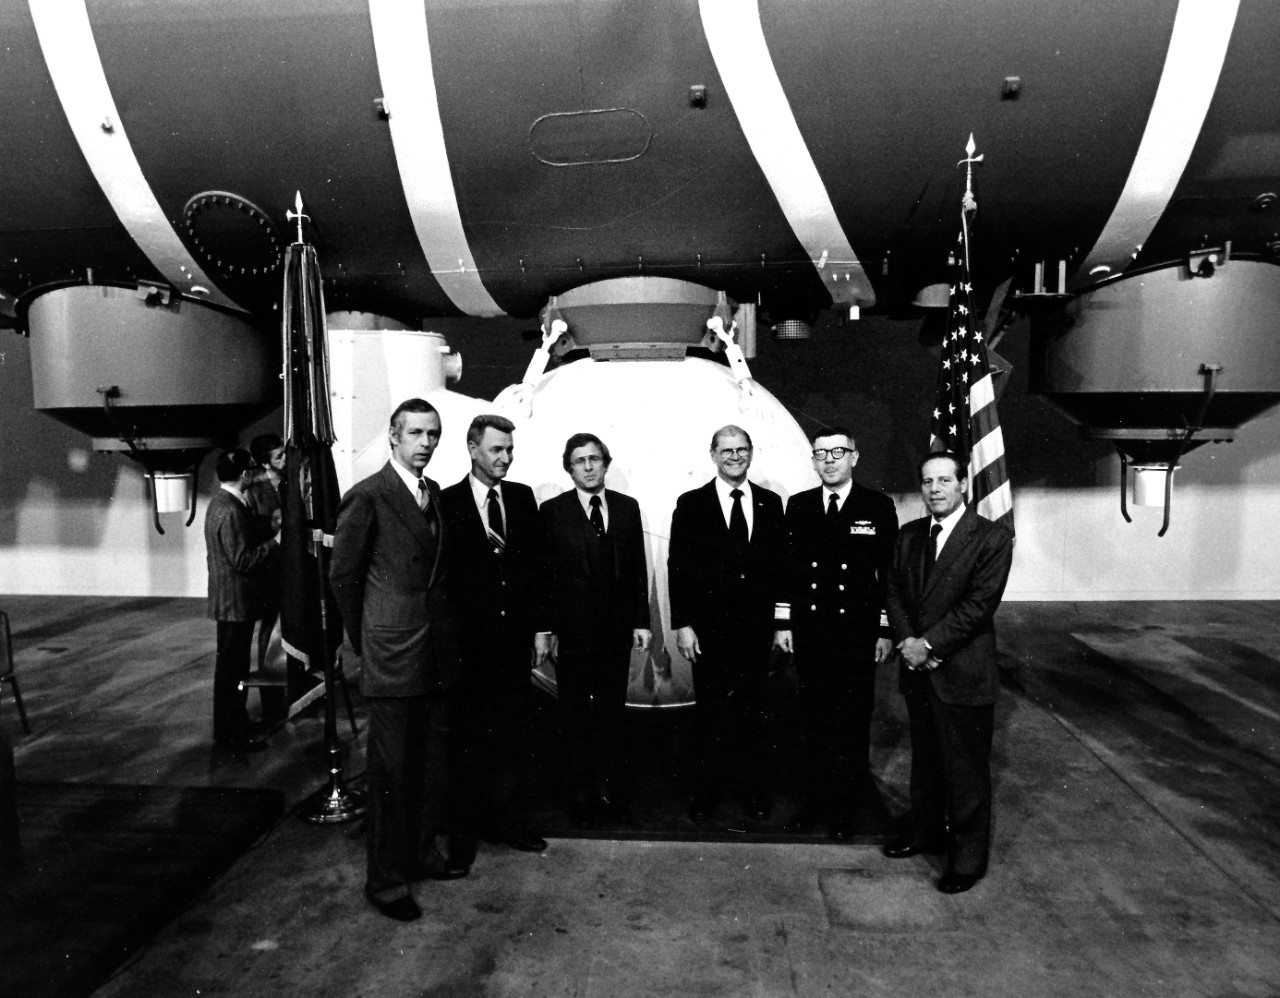 NMUSN-630:  Bathyscaph Trieste, 1977.   Opening ceremony of the Trieste display.    Shown on far left is Jacques Piccard and third from left is Lieutenant Don Walsh.   The two men were the first men to descend and explore the Marianas Trench in January 1960.    National Museum of the U.S. Navy Photograph Collection.  